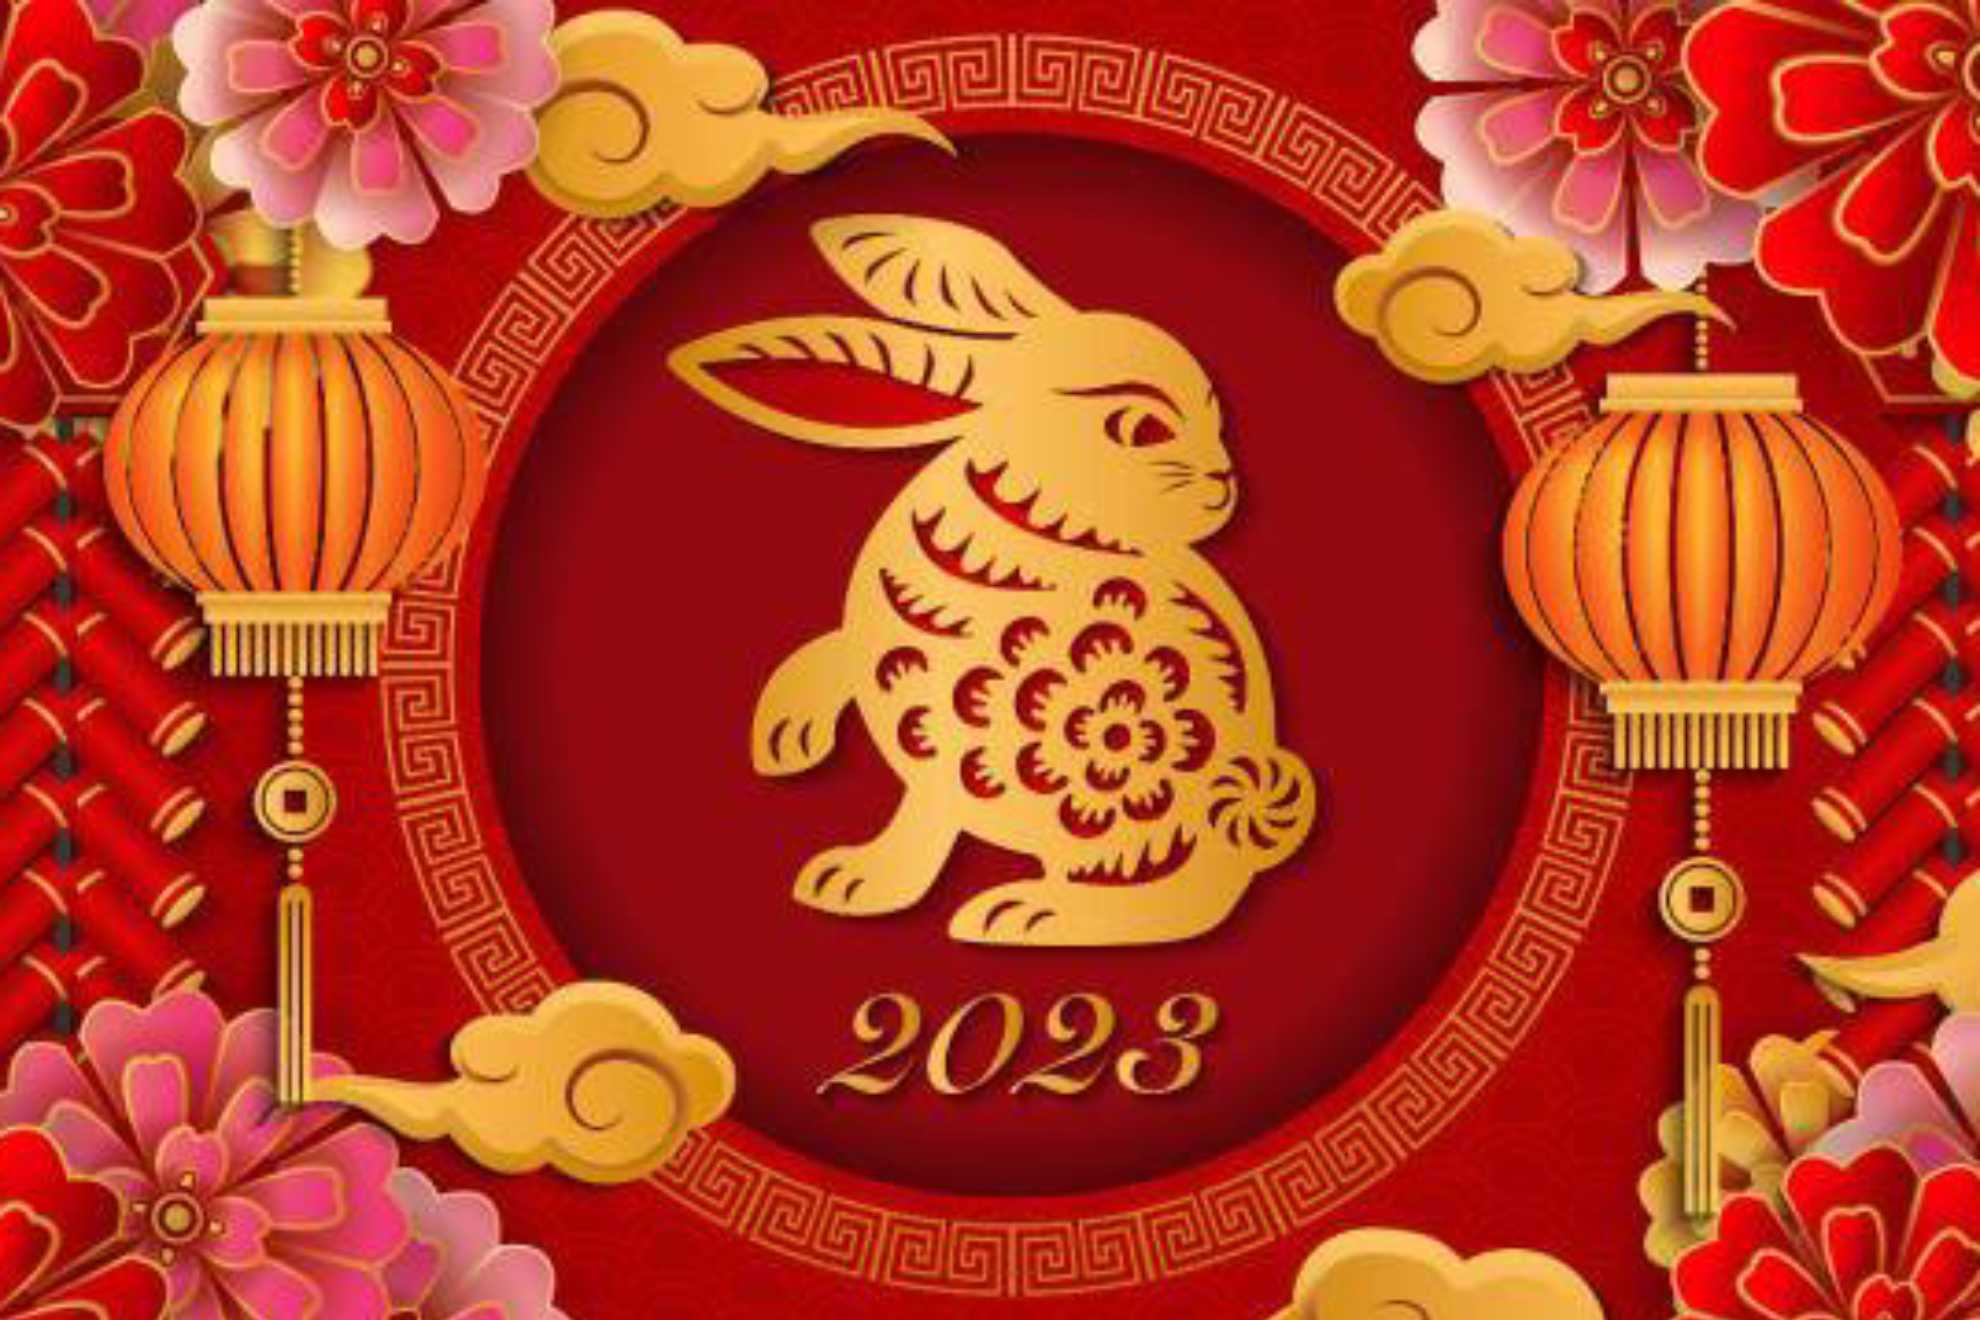 Chinese zodiac fortune predictions: What’s in store for the Year of the Rabbit?